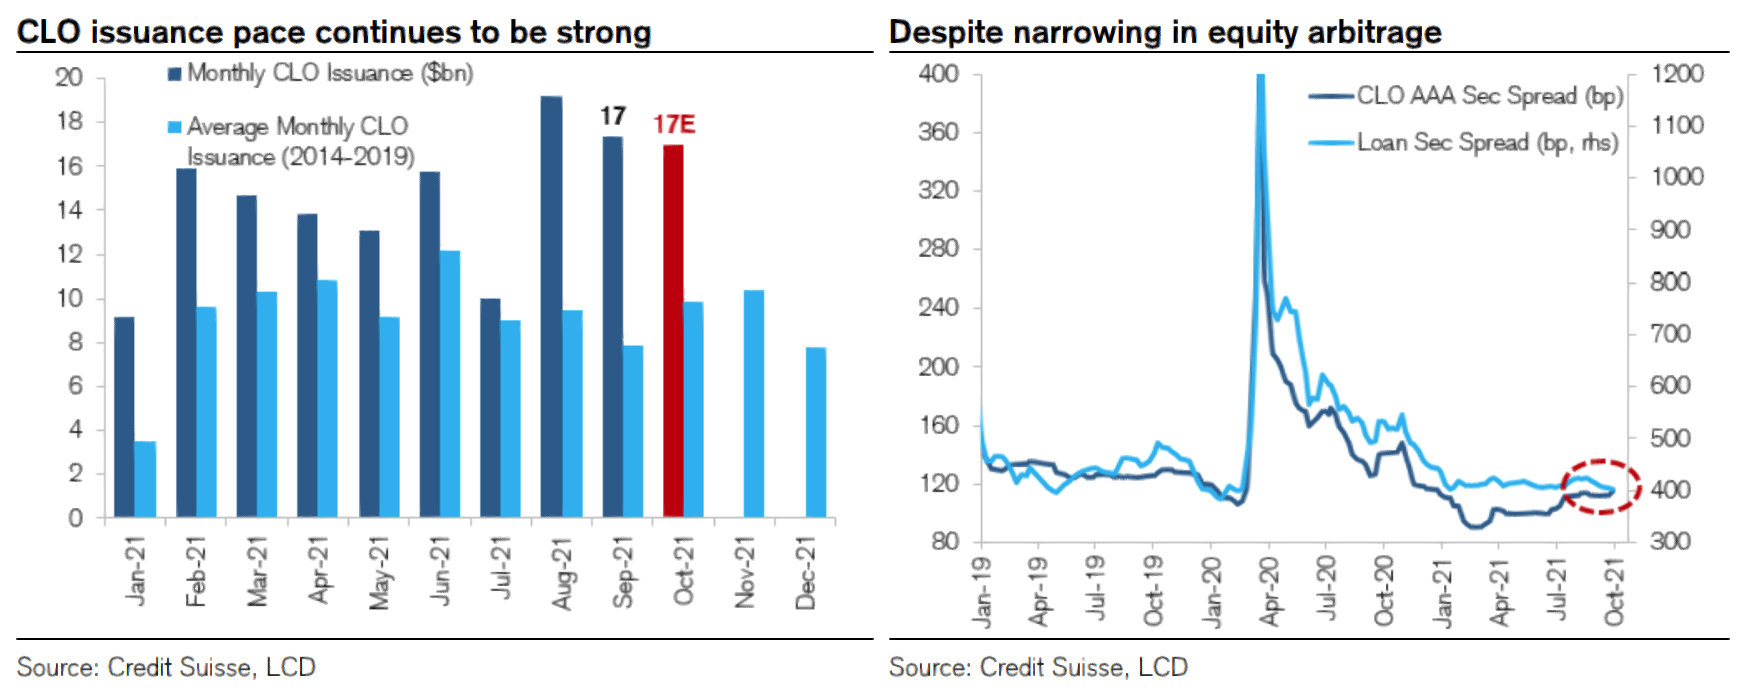 CLO Issuance | Source: Credit Suisse